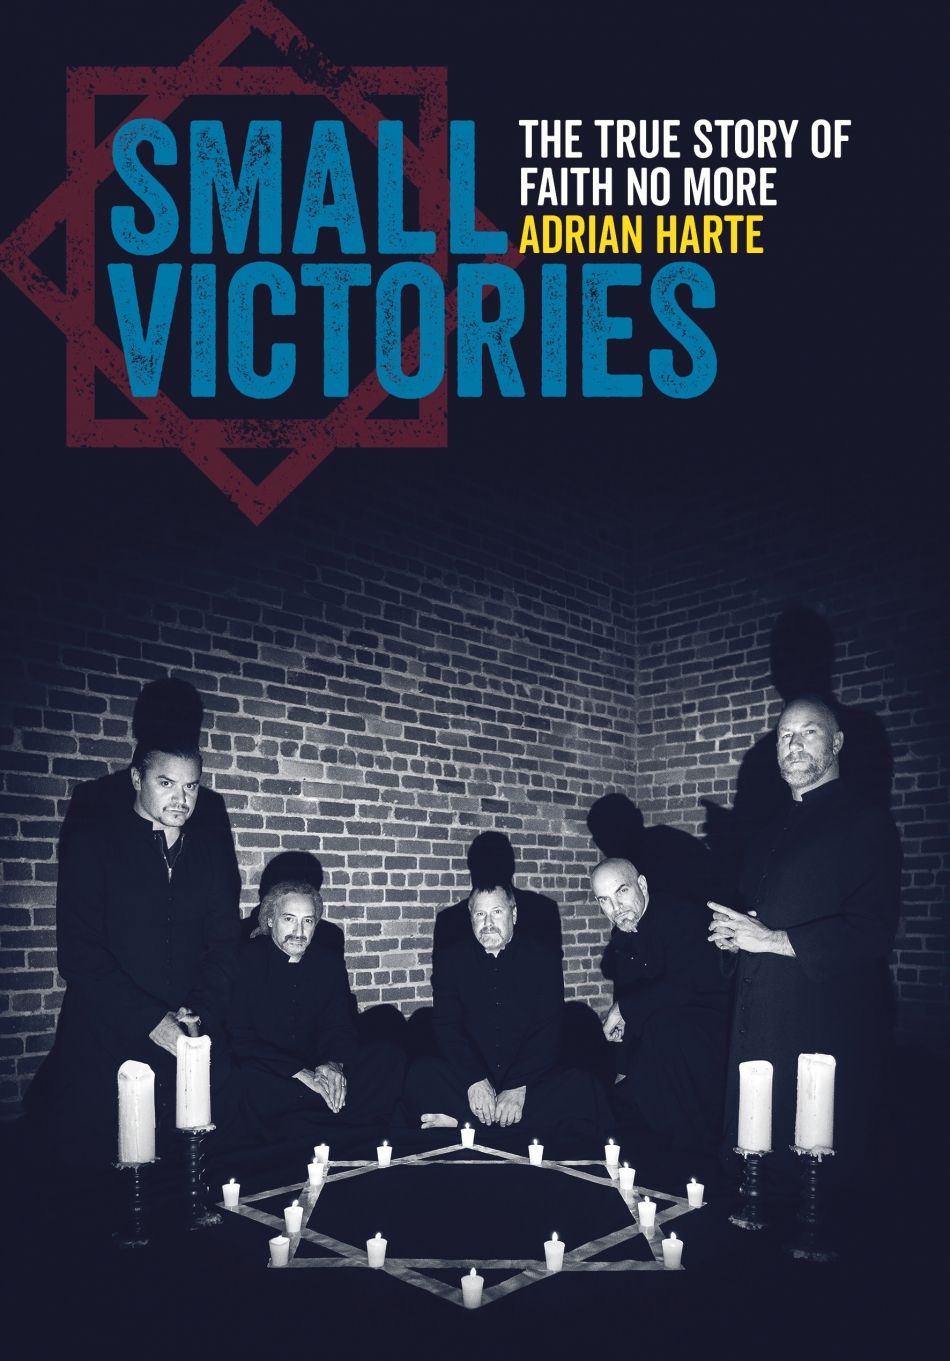 UPCOMING FAITH NO MORE BOOK, ‘SMALL VICTORIES: THE TRUE STORY OF FAITH NO MORE’